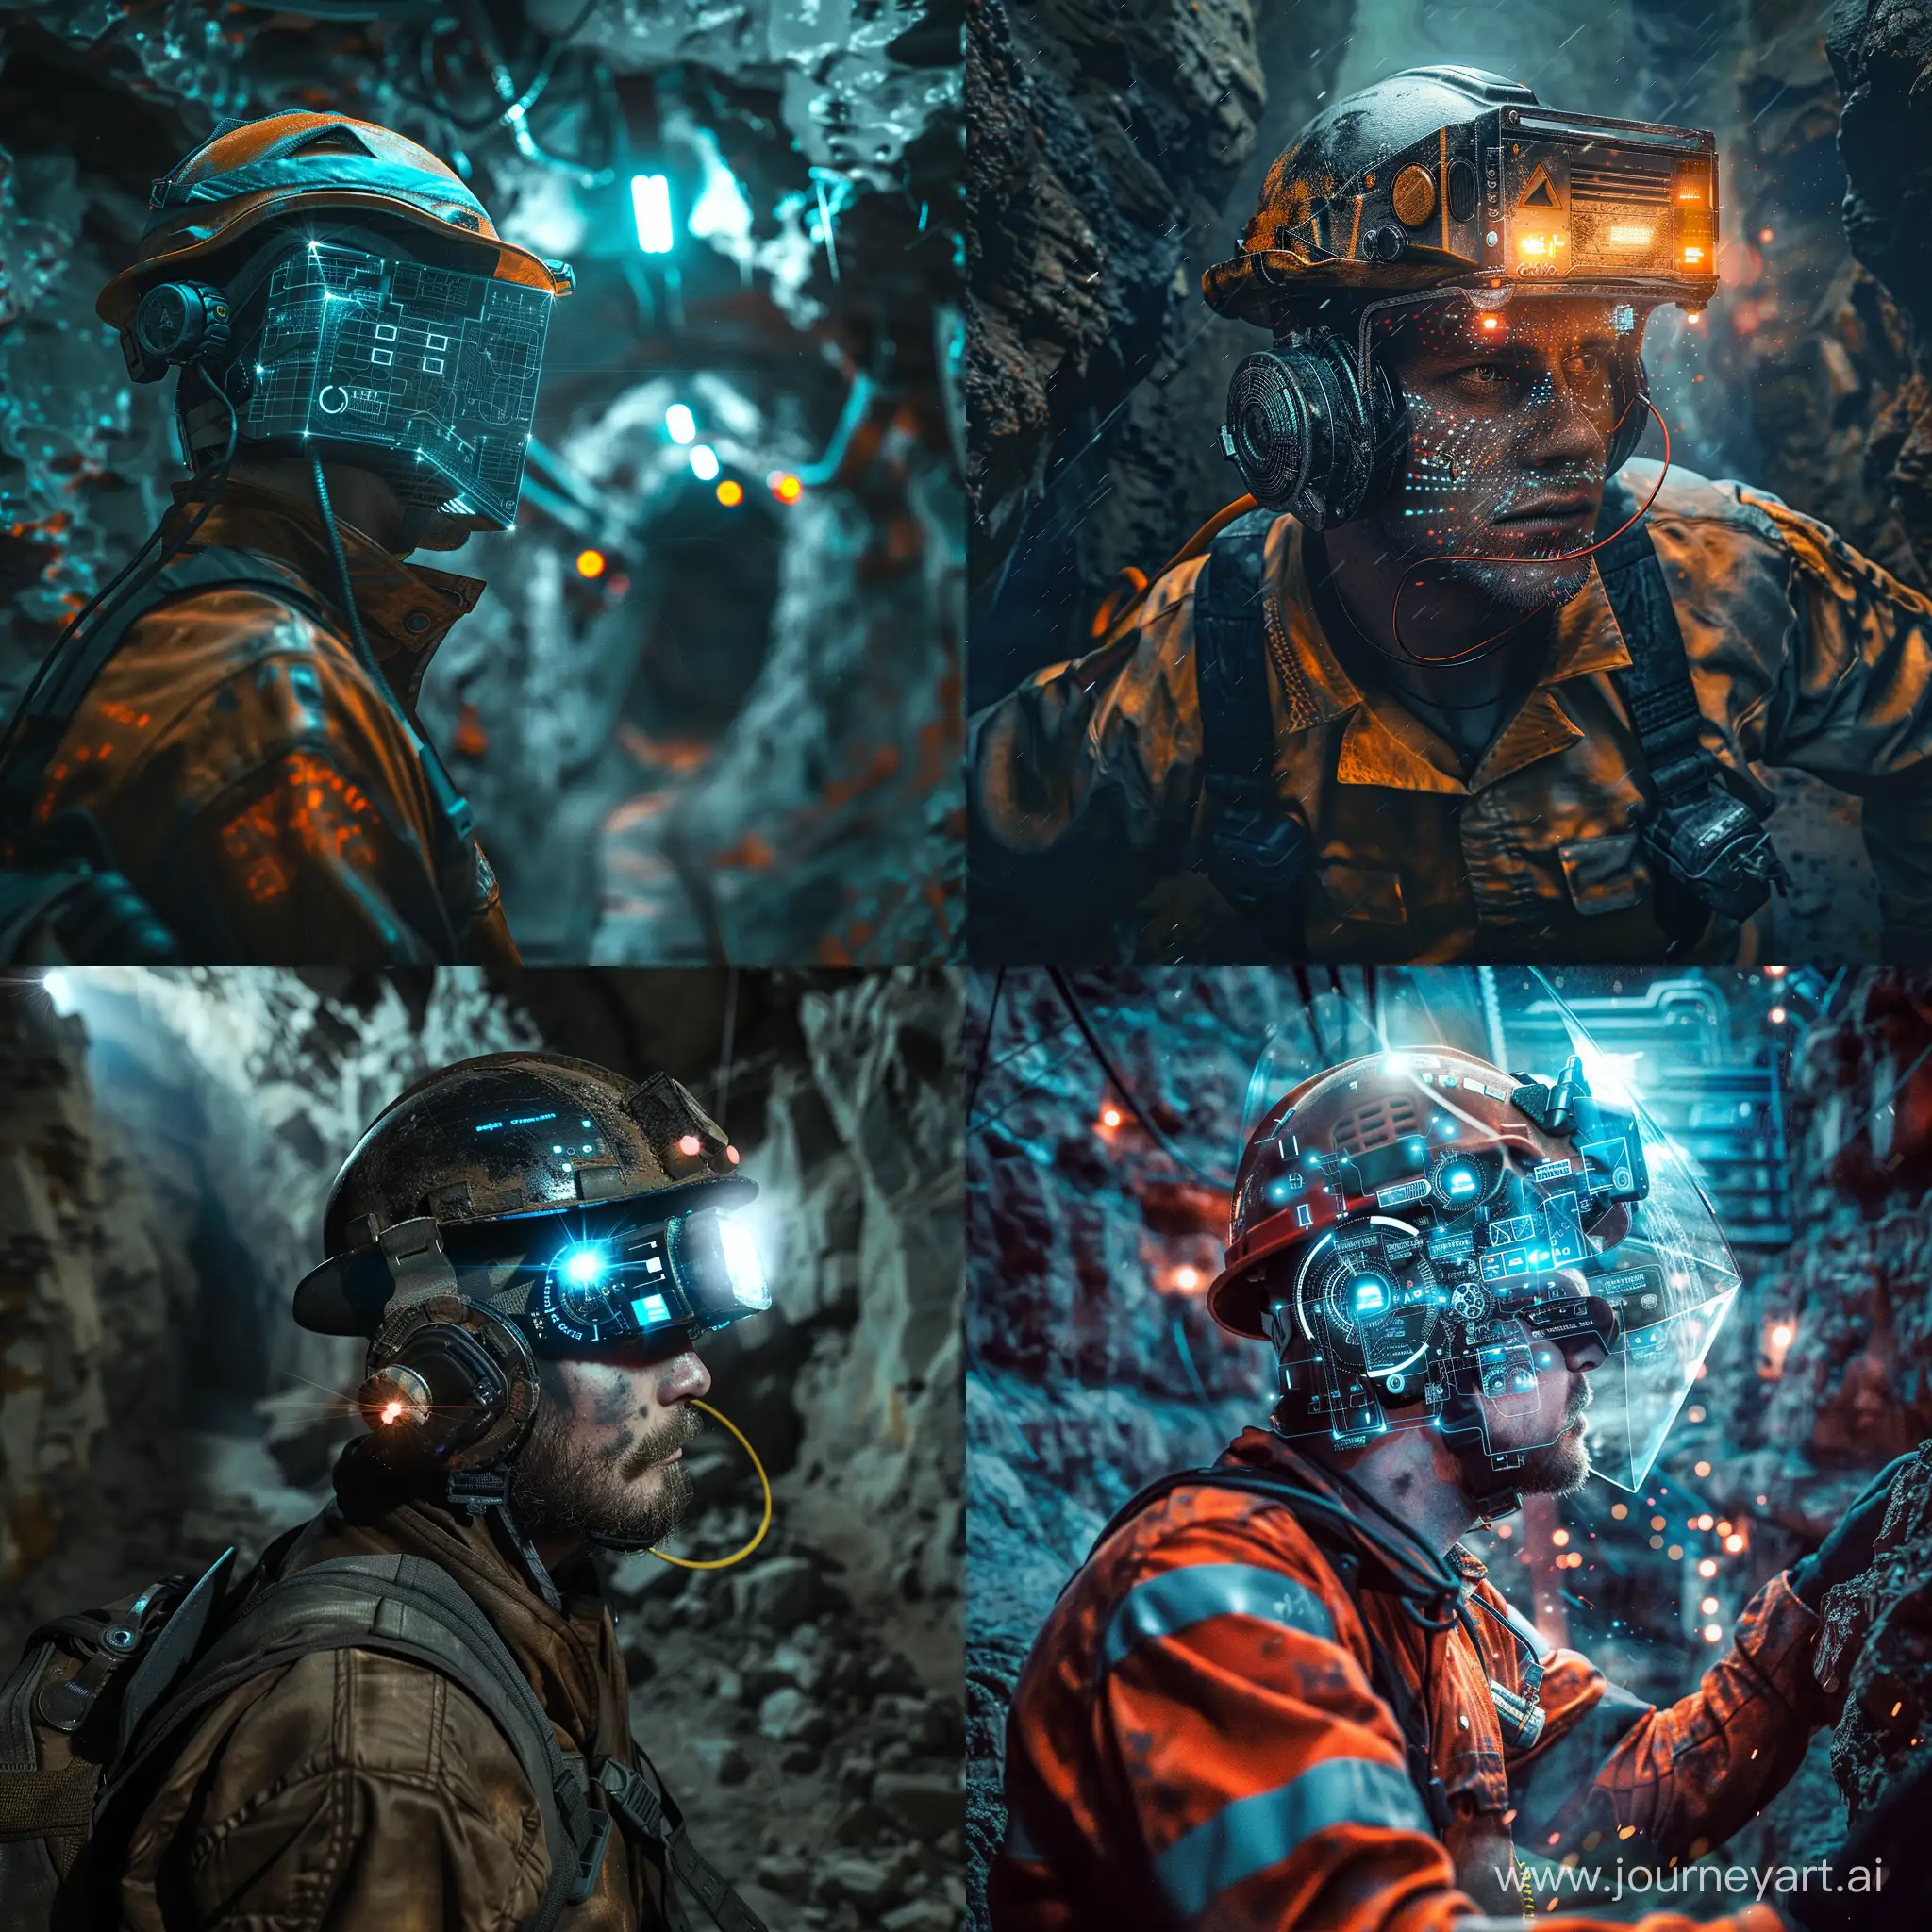  ﻿ imagine a miner who wear some personal proactive equipments such as smart gaurdhat and wirstband that is working in an underground mine